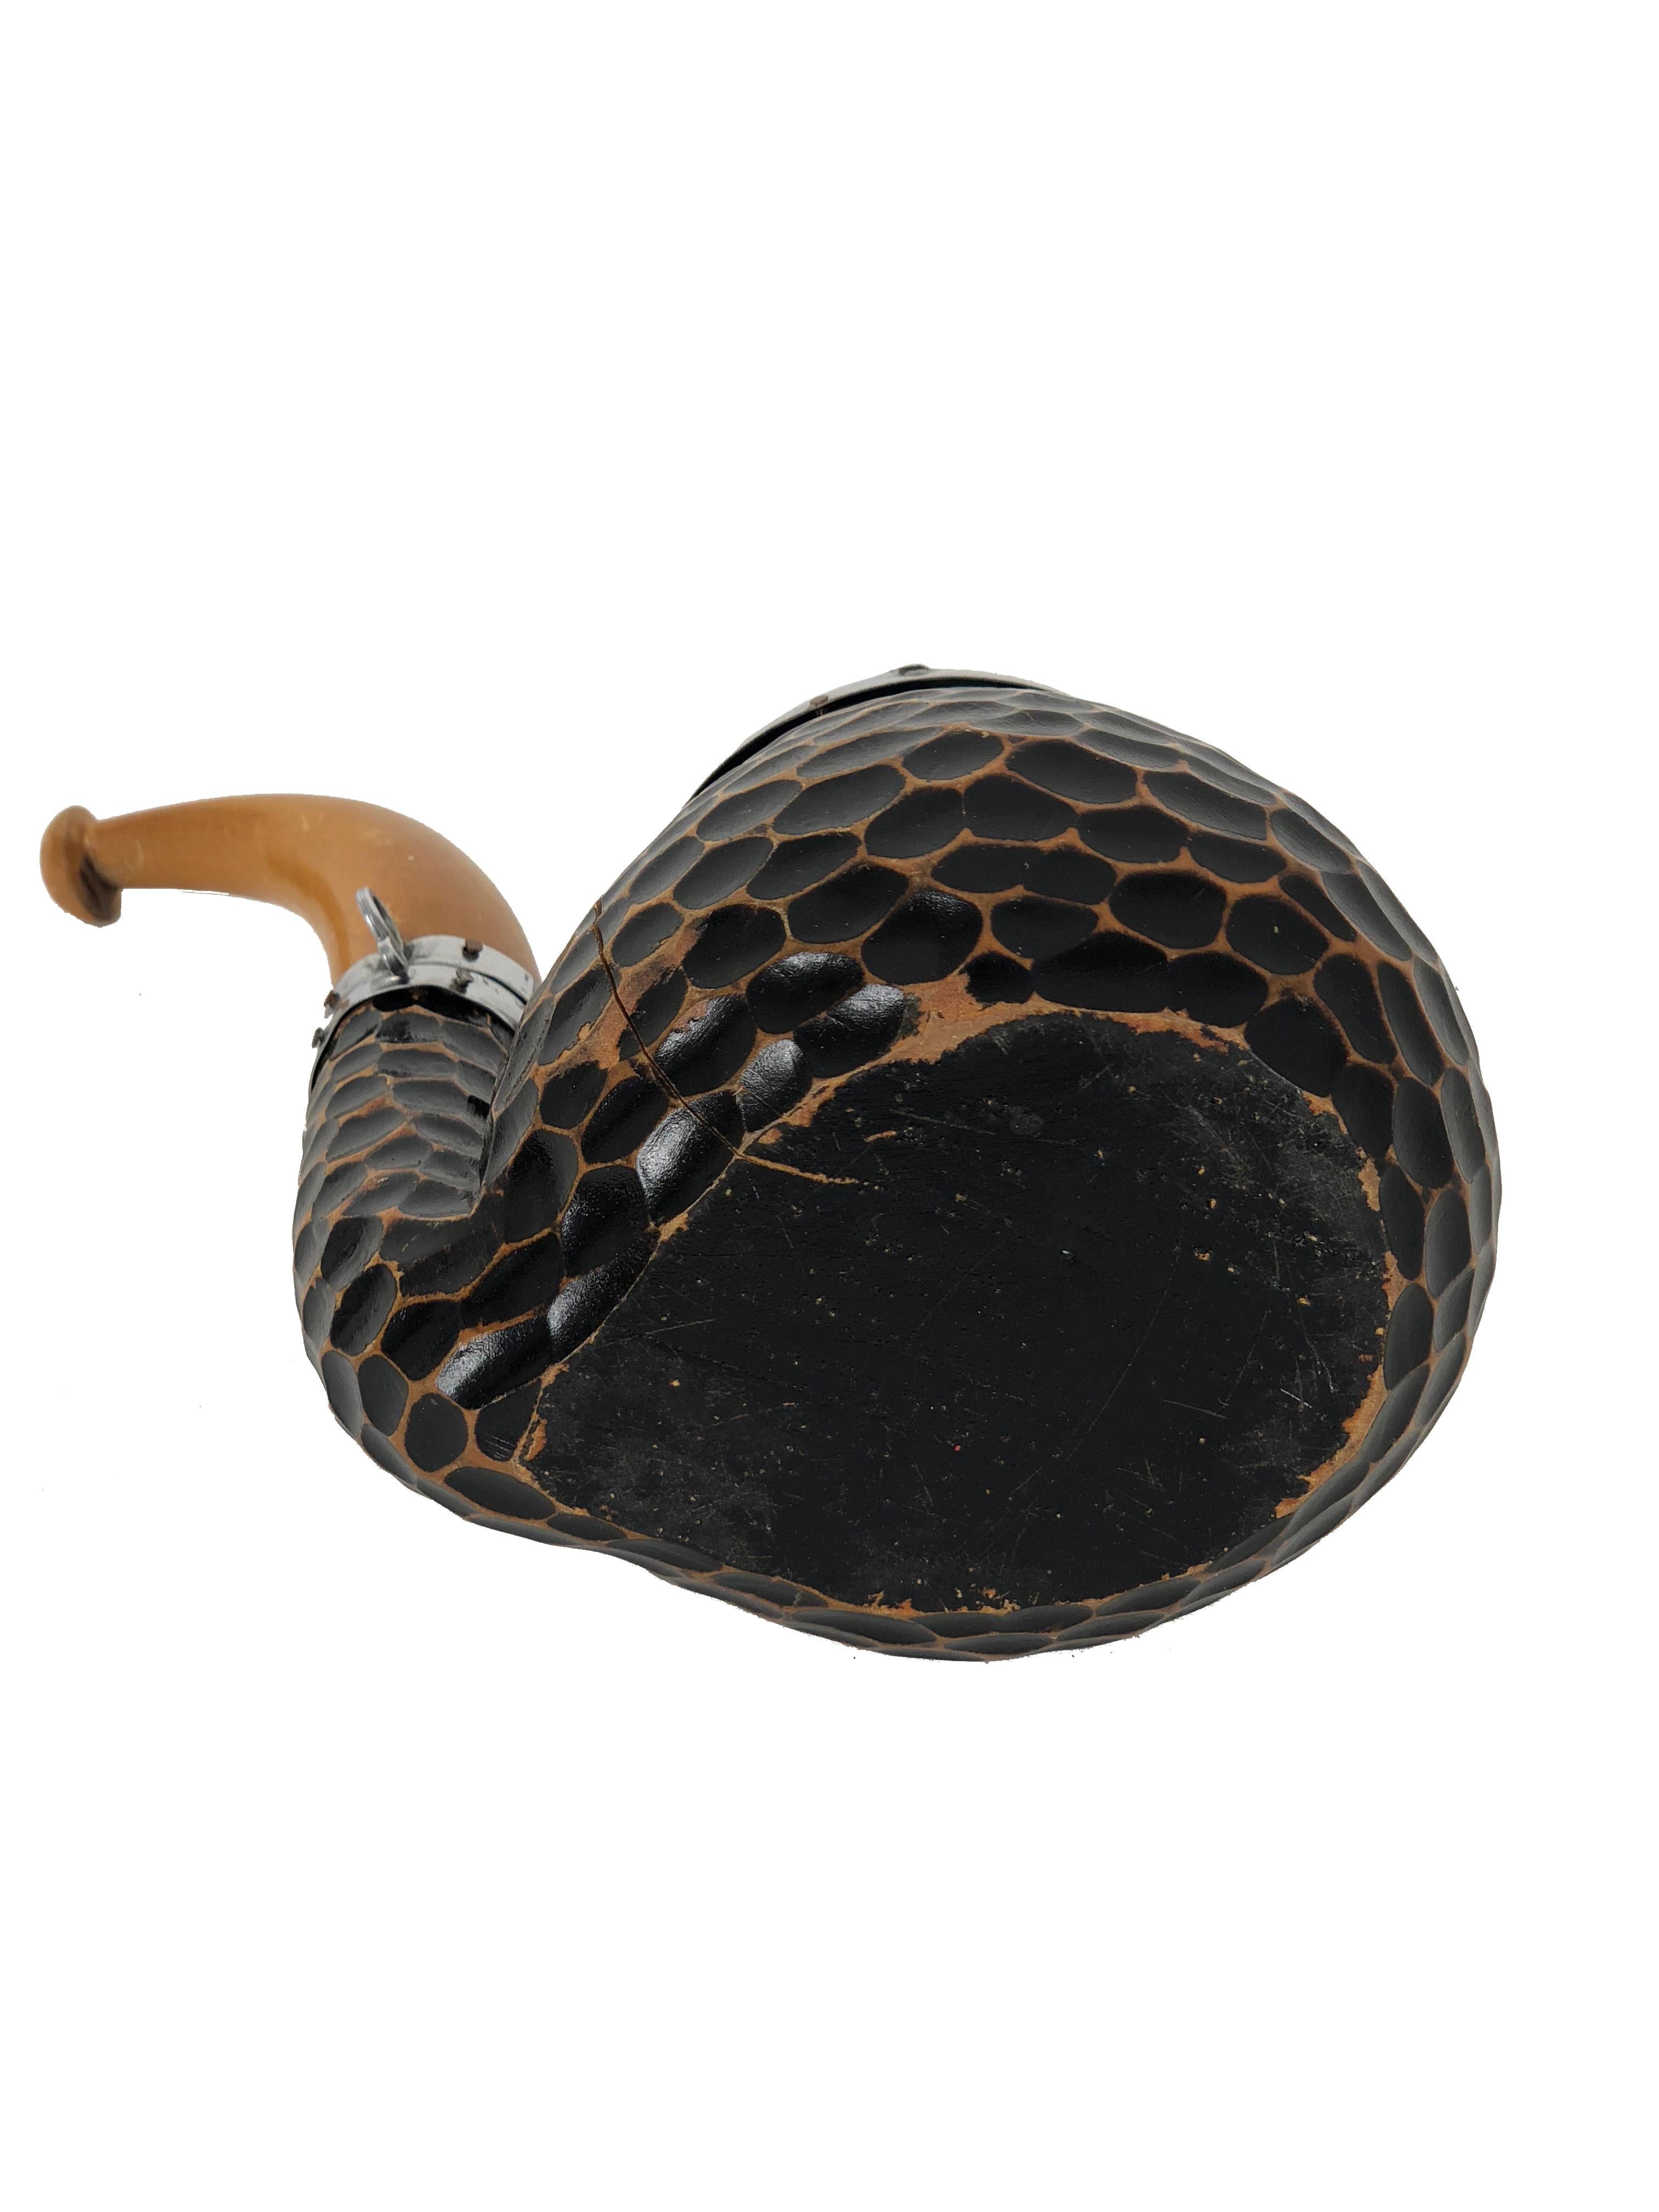 Metal Vintage Black Aldo Tura Tobacco Wood and Brass Pipe, 1940s, Italy